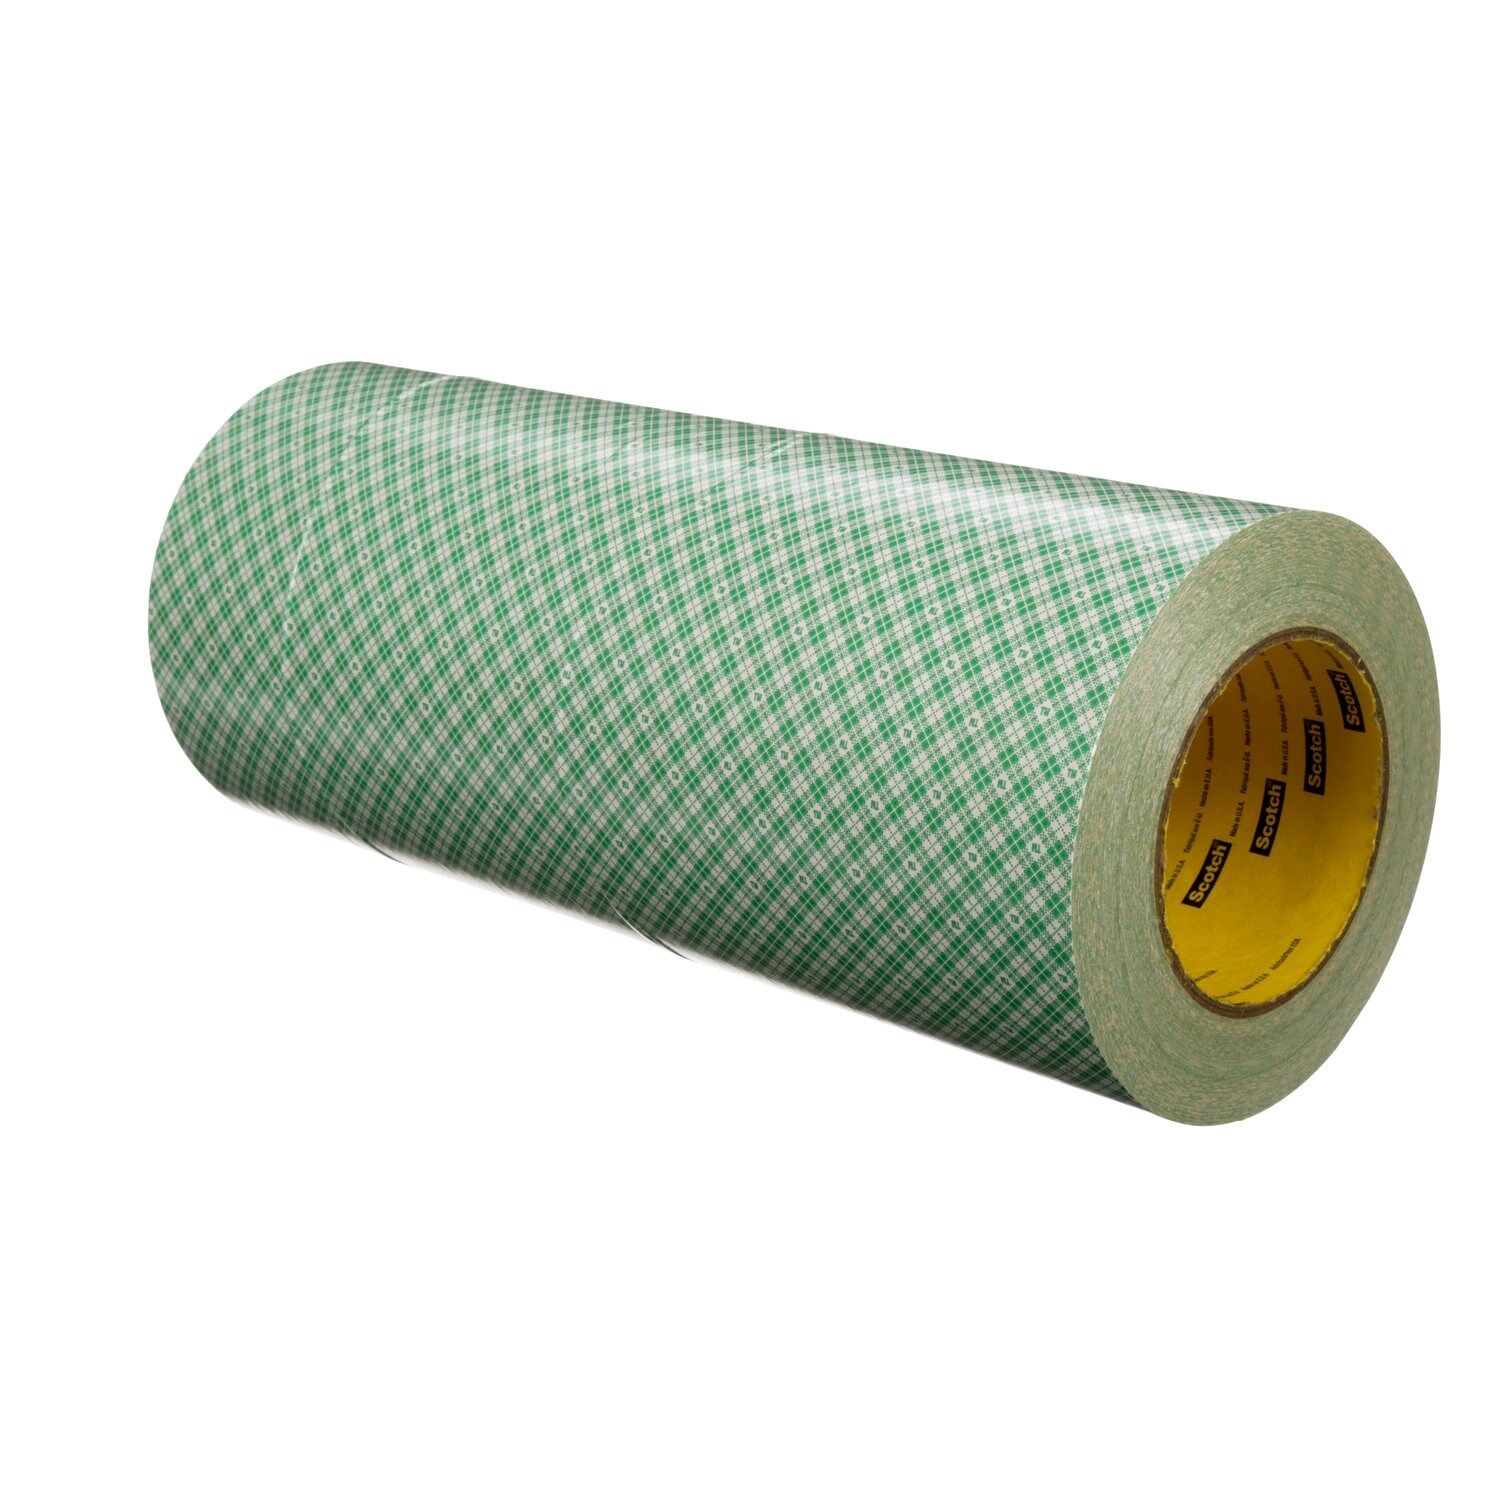 7000049325 - 3M Double Coated Paper Tape 410M, Natural, 12 in x 36 yd, 5 mil, 4
rolls per case